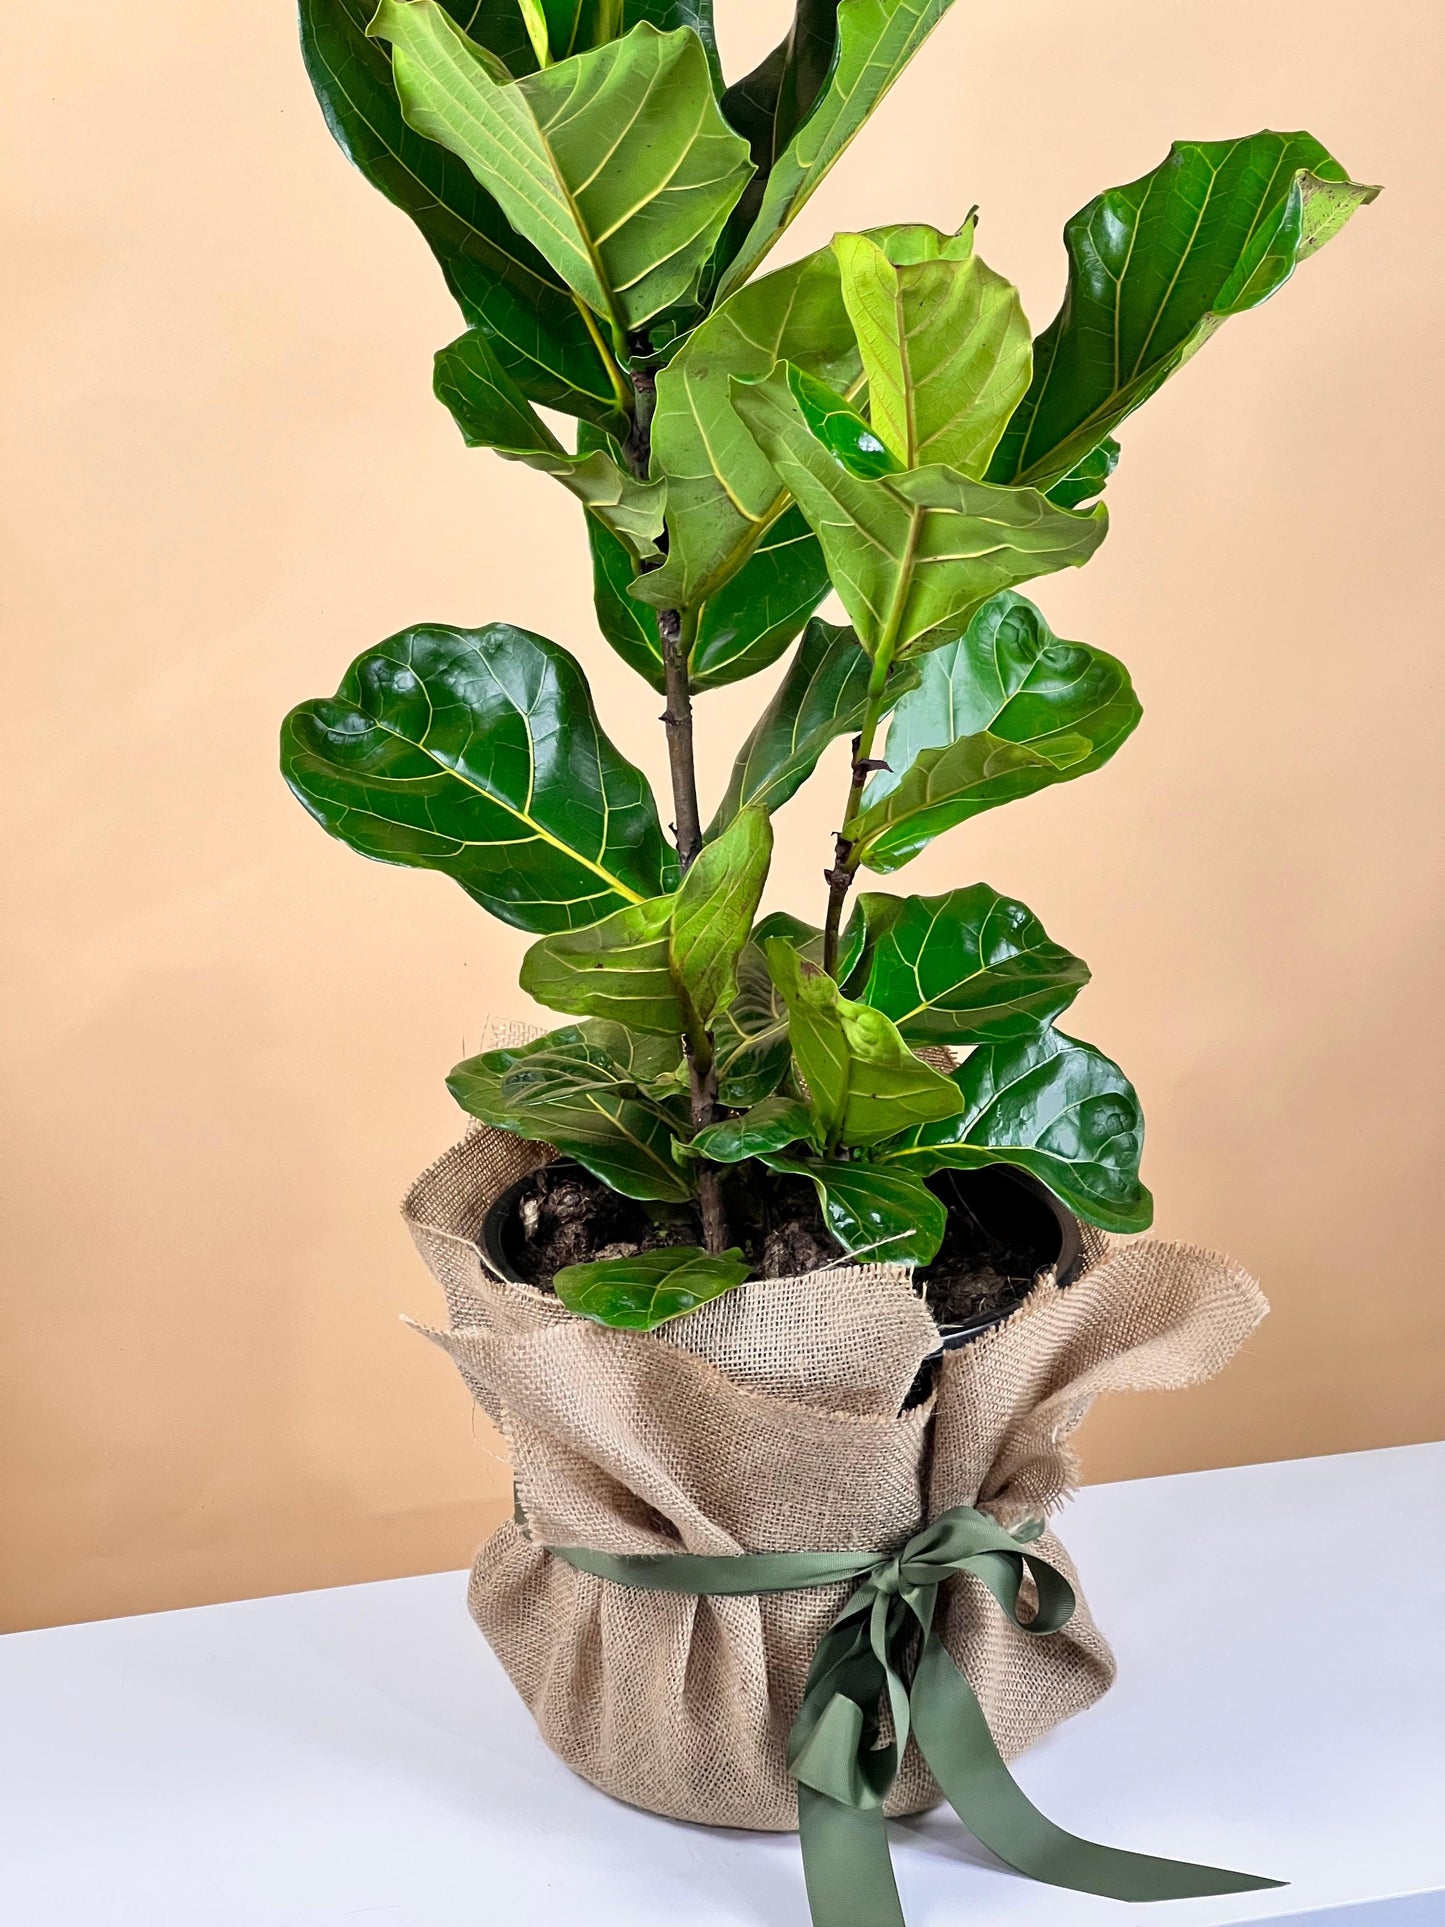 Fiddle Leaf Fig Plant -  made with love by Flowers Gold Coast www.flowersgoldcoast.com.au the Gold Coast's best Florist - Same Day Flower Delivery